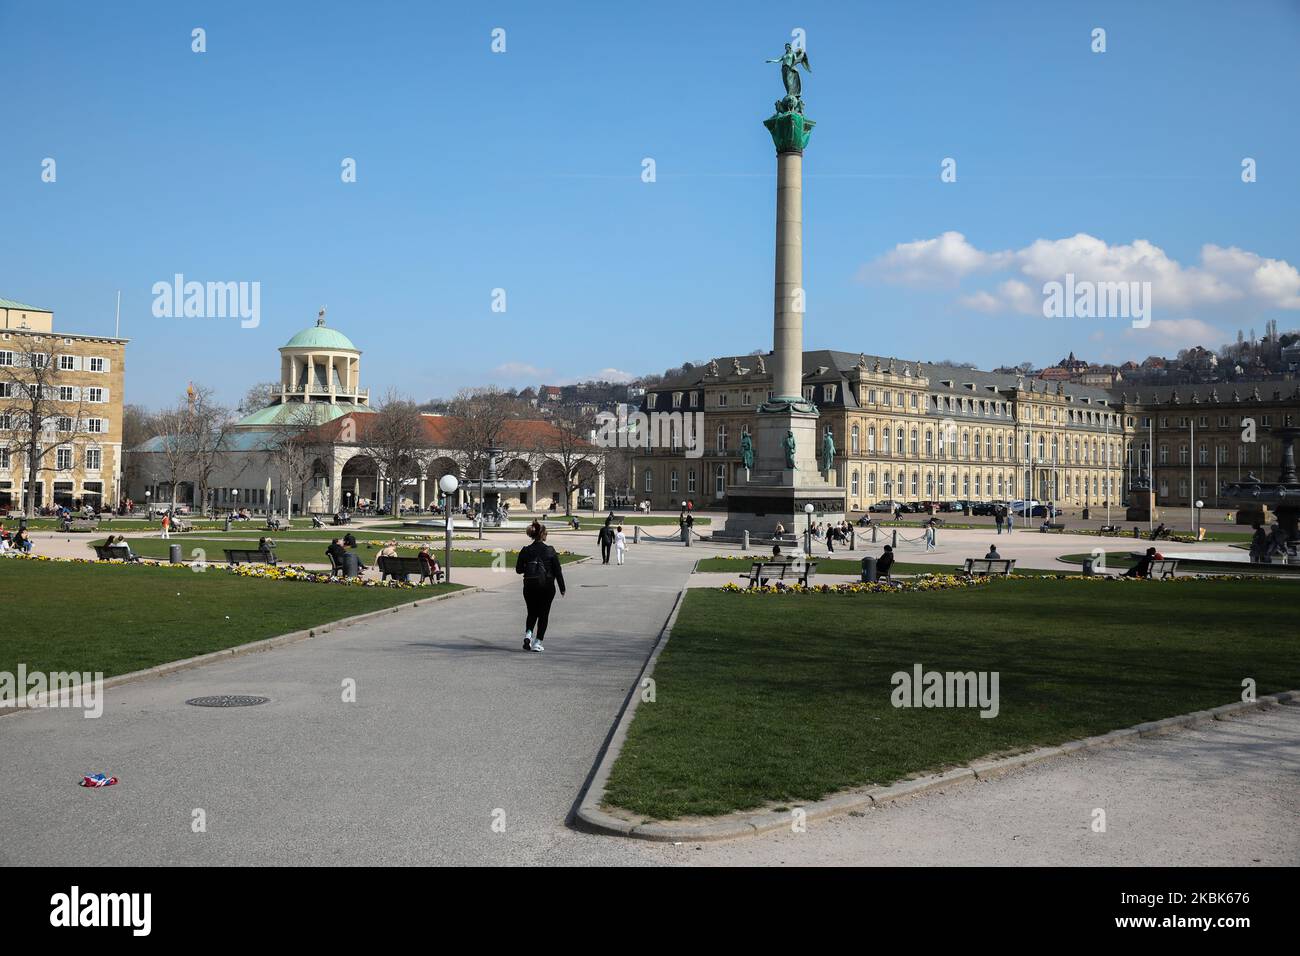 Resident enjoy a sunny day at the center of Stuttgart, southern Germany on March 18, 2020. German leaders urged citizens to stay home, as the government announced unprecedented nationwide measures to radically scale back public life in order to slow the spread of the coronavirus. (Photo by Agron Beqiri/NurPhoto) Stock Photo